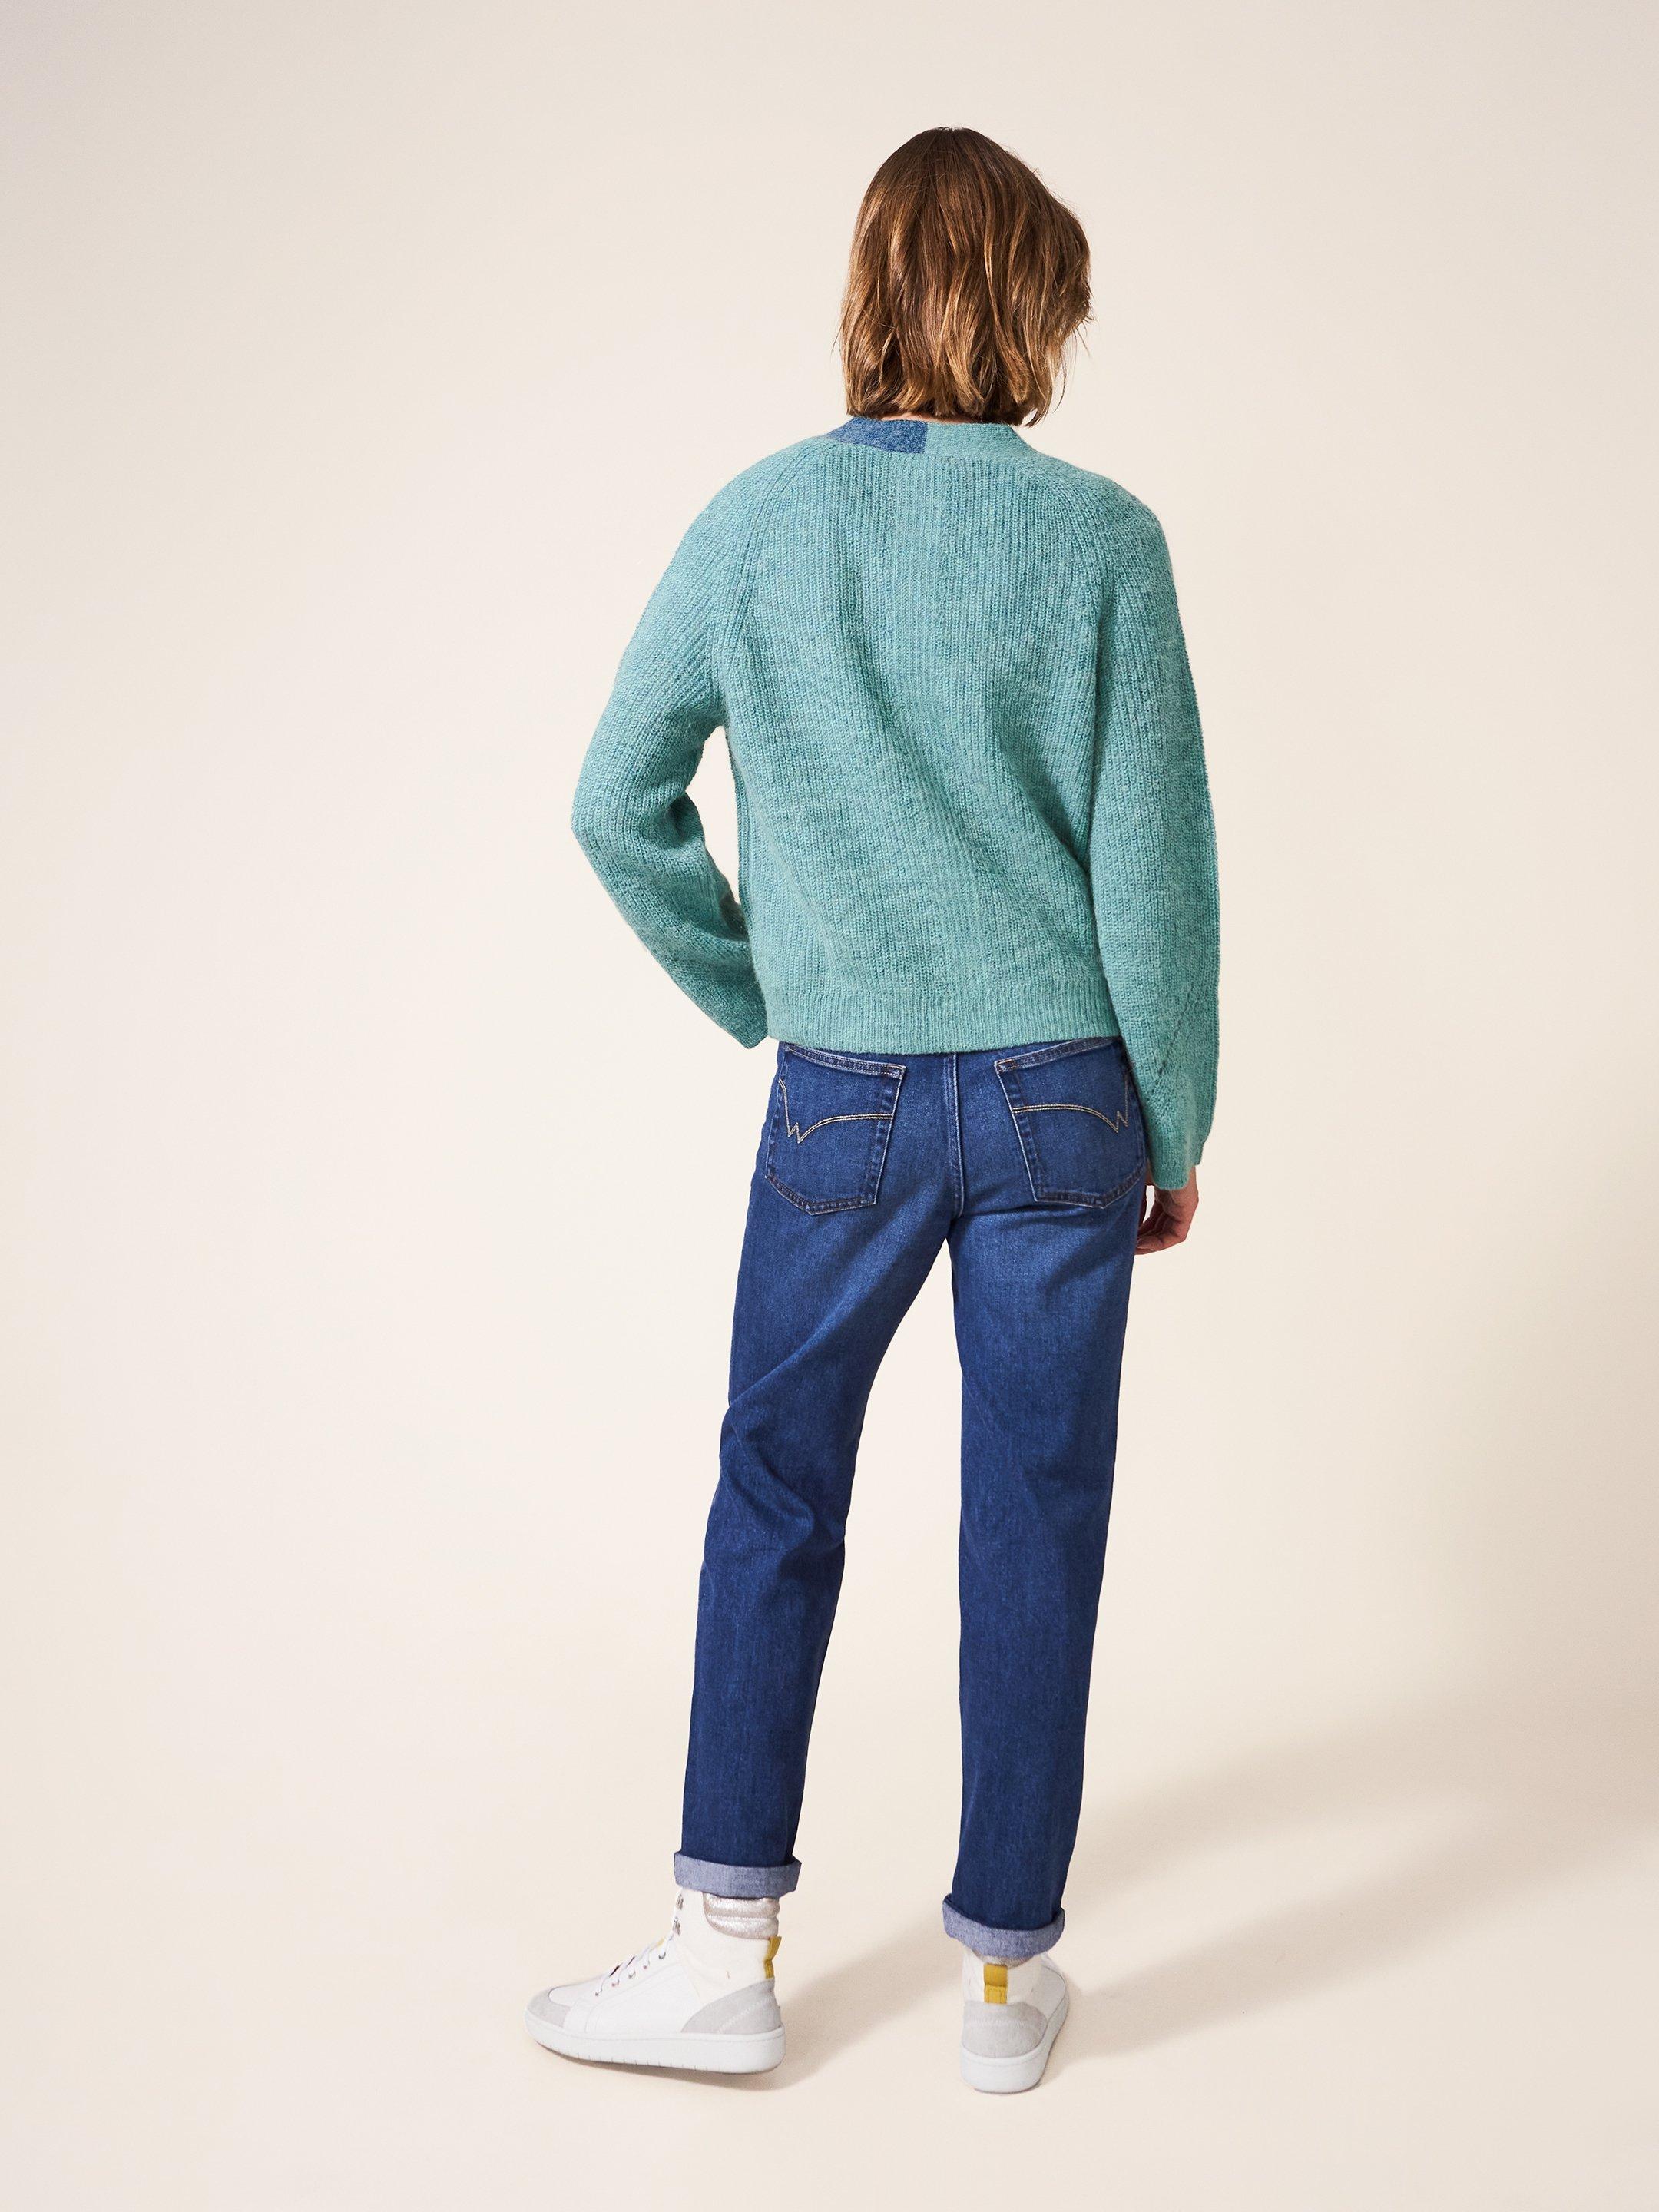 Dehlia Knitted Cardi in MID TEAL - MODEL BACK